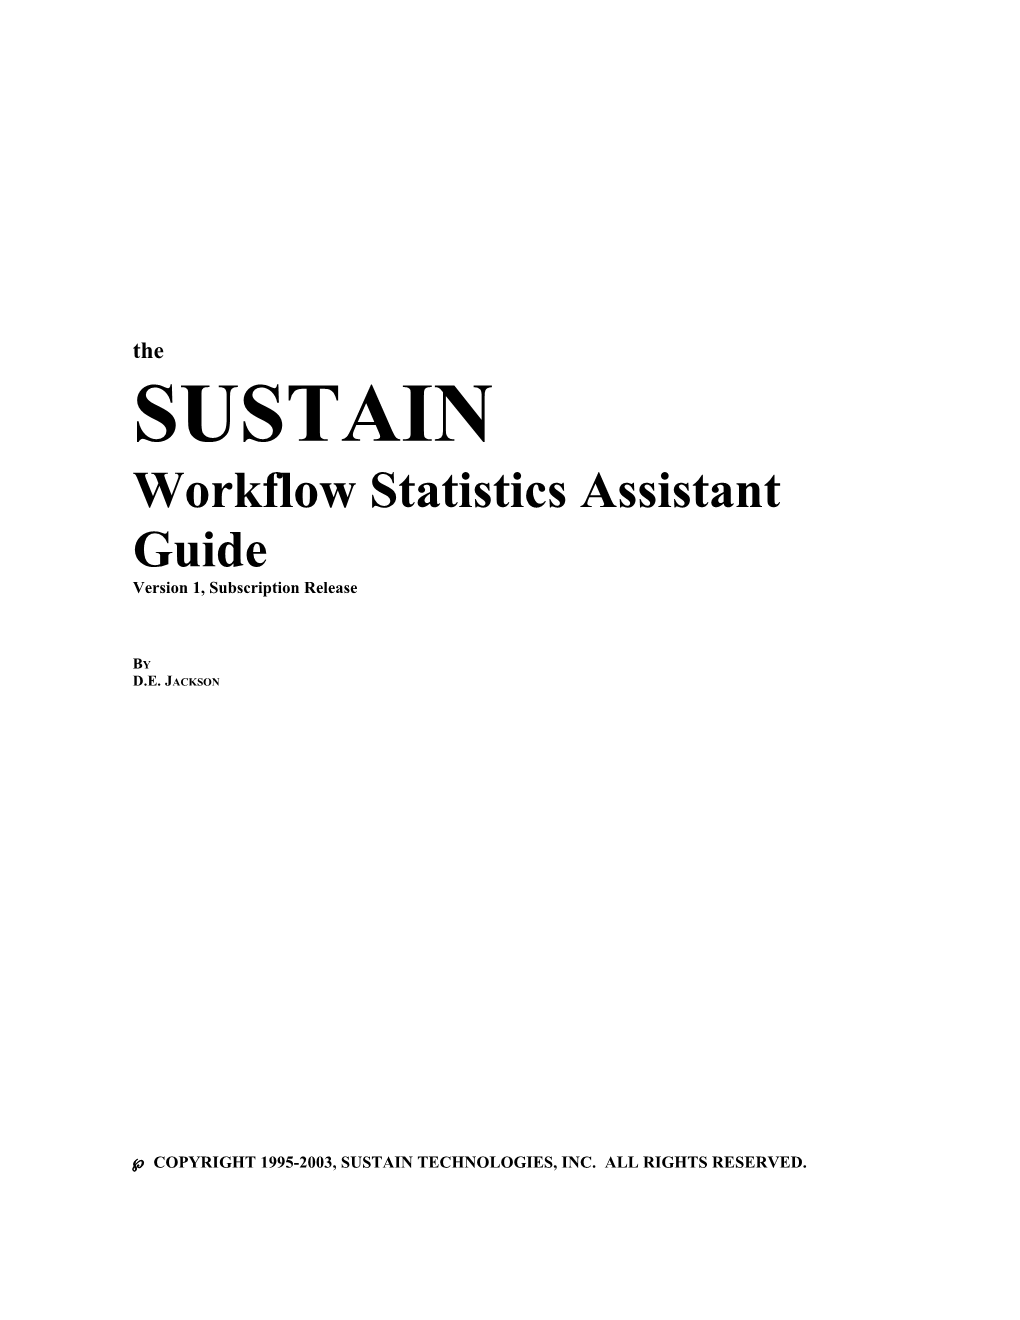 The SUSTAIN Workflow Statistics Assistant Guide